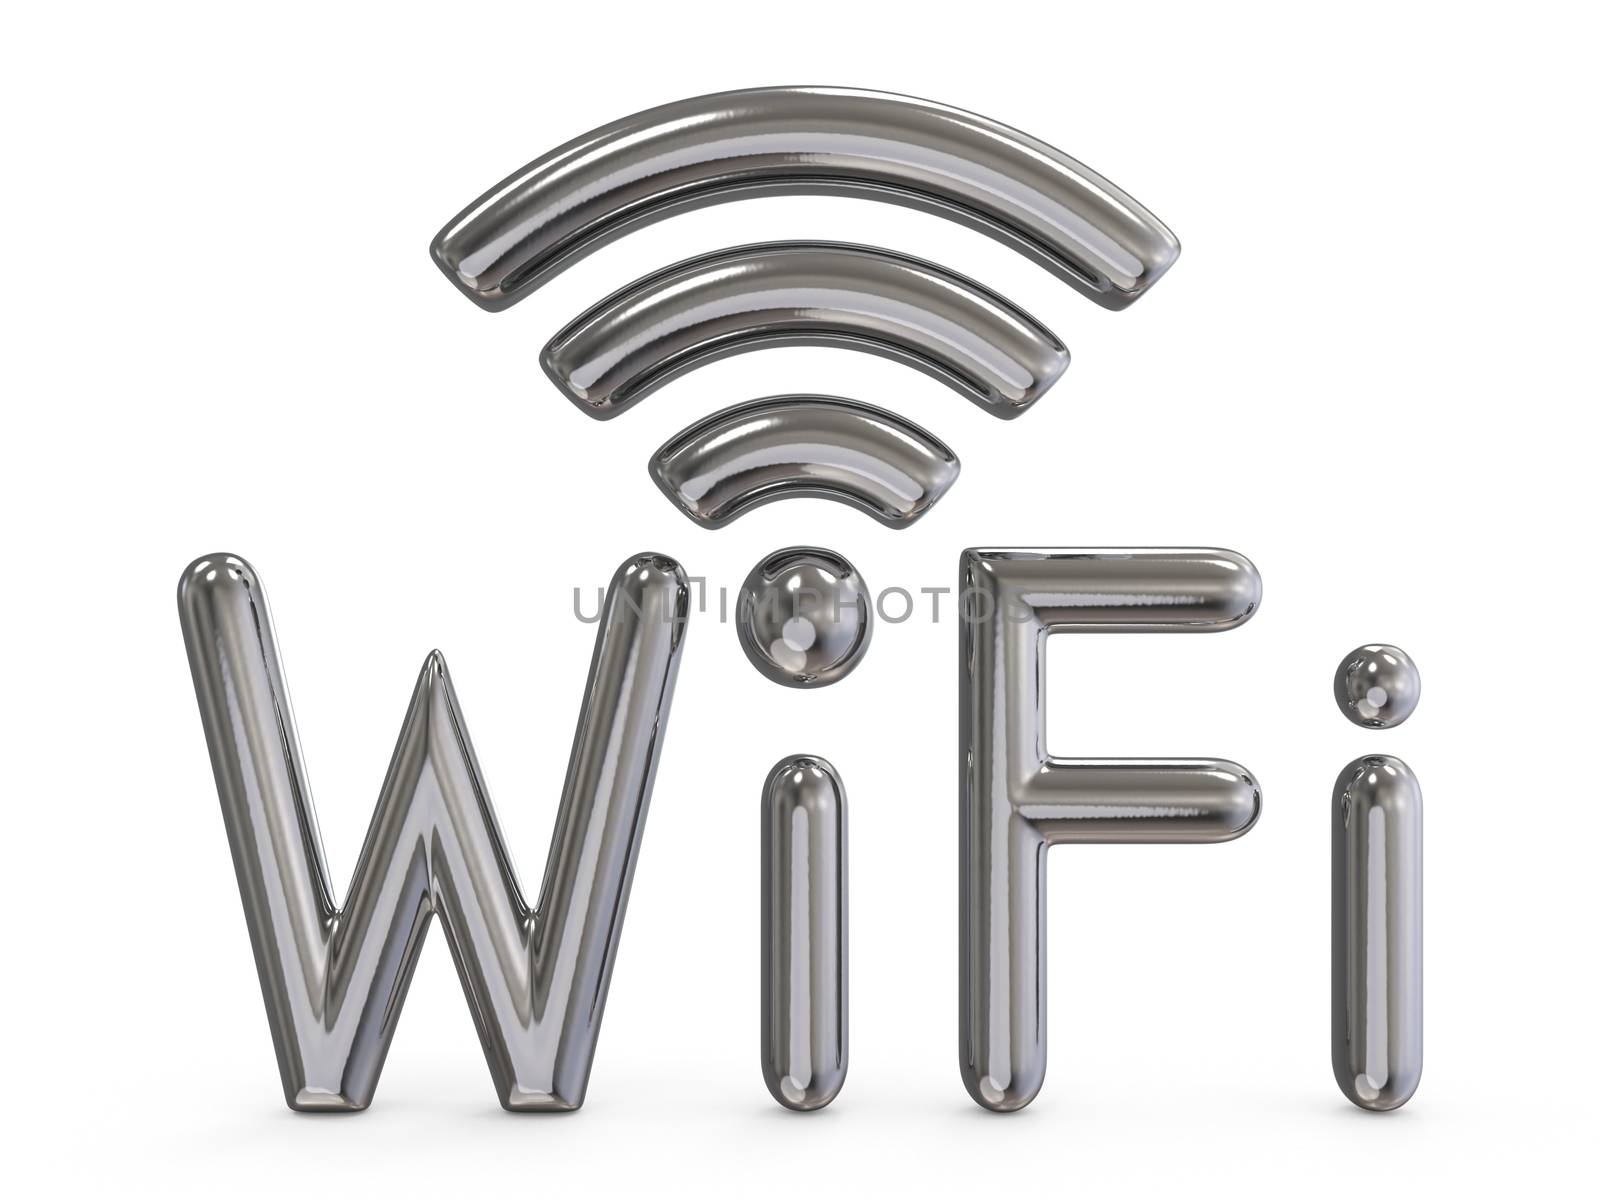 Metal grey WiFi sign 3D render illustration isolated on white background